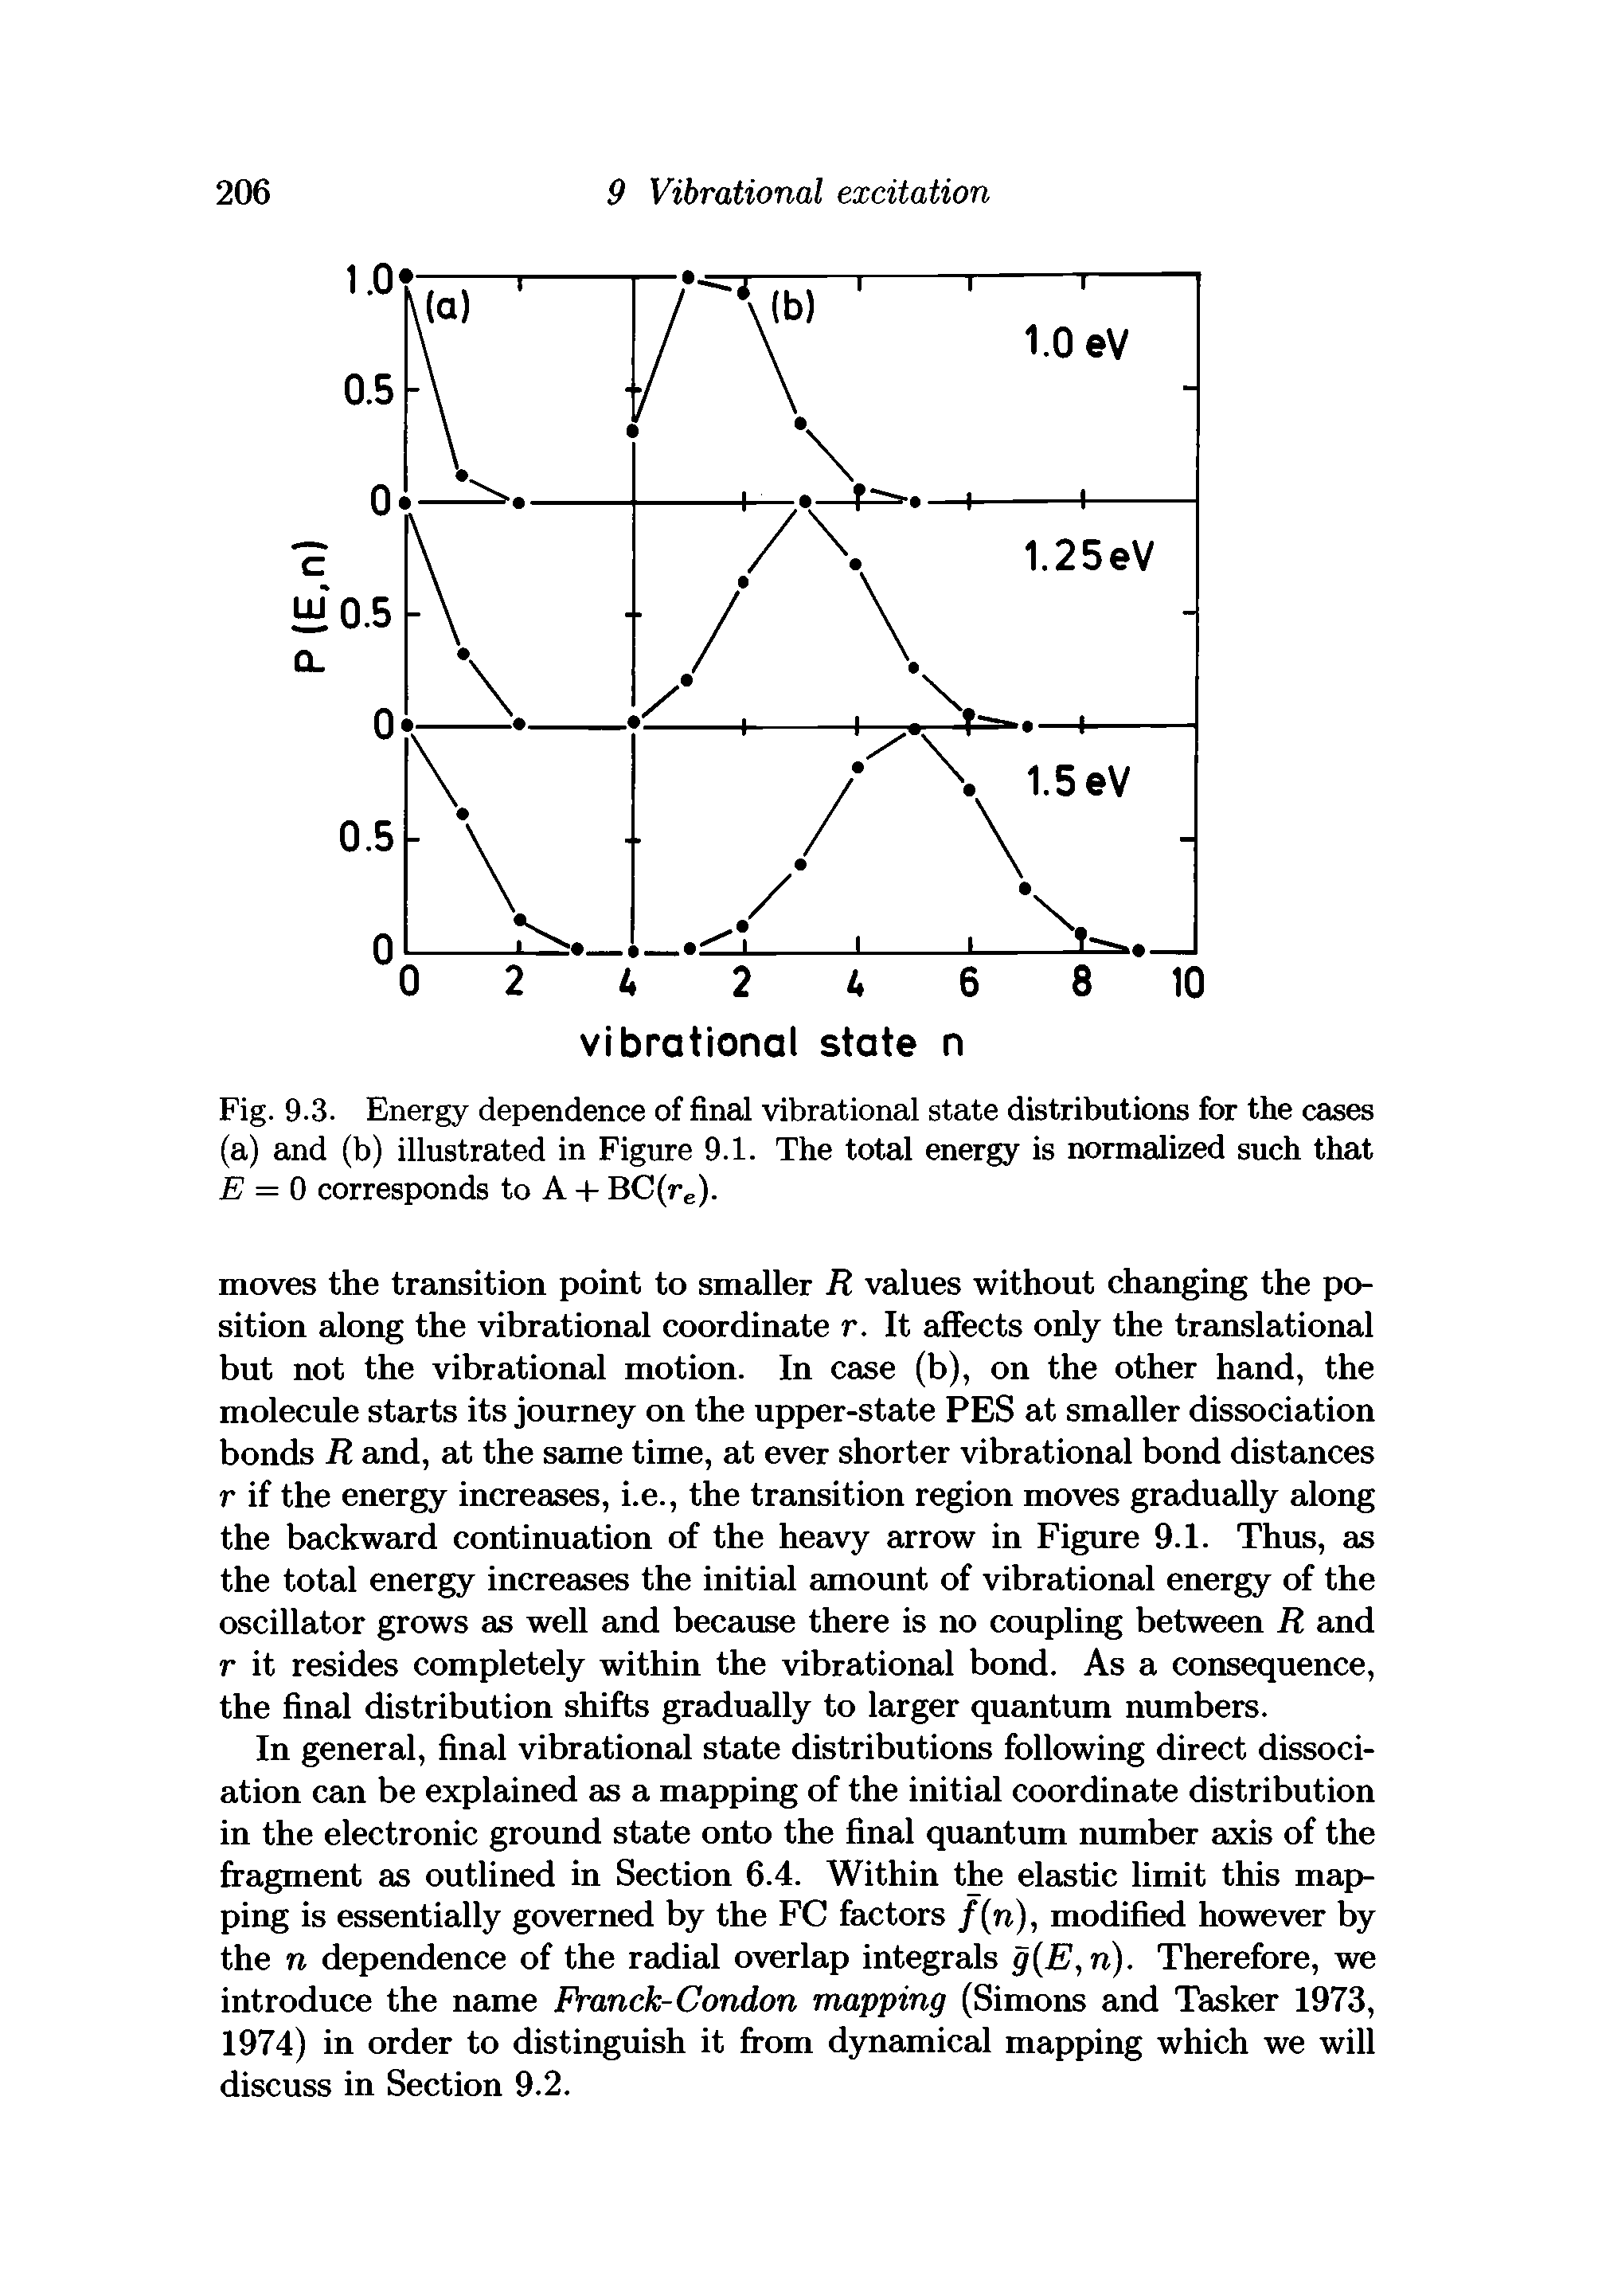 Fig. 9.3. Energy dependence of final vibrational state distributions for the cases (a) and (b) illustrated in Figure 9.1. The total energy is normalized such that E = 0 corresponds to A + BC(re).